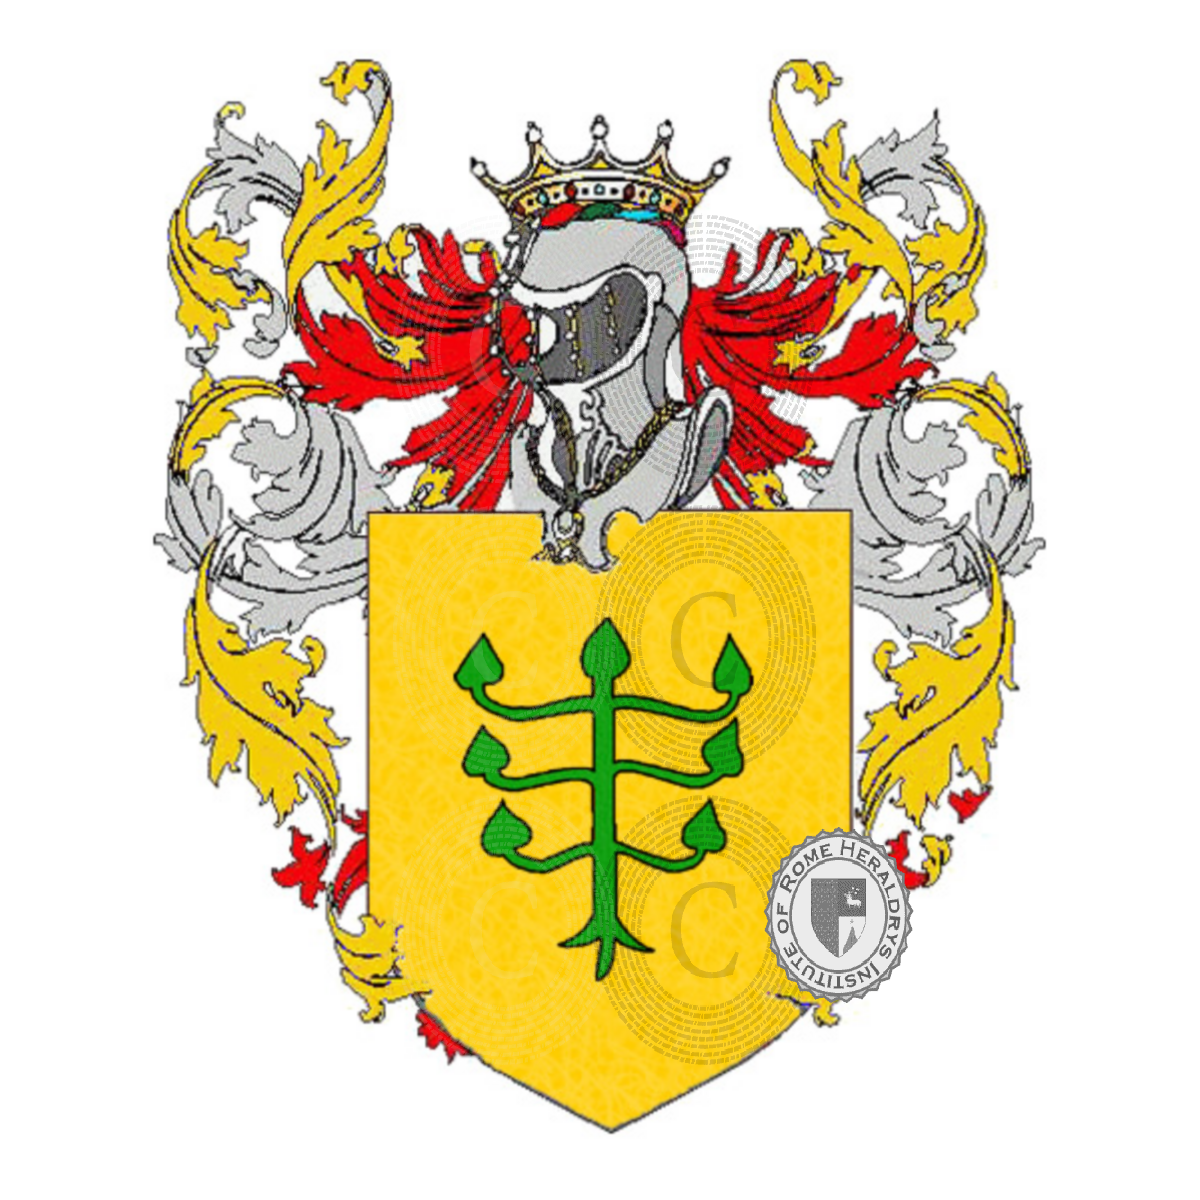 Coat of arms of familytaller